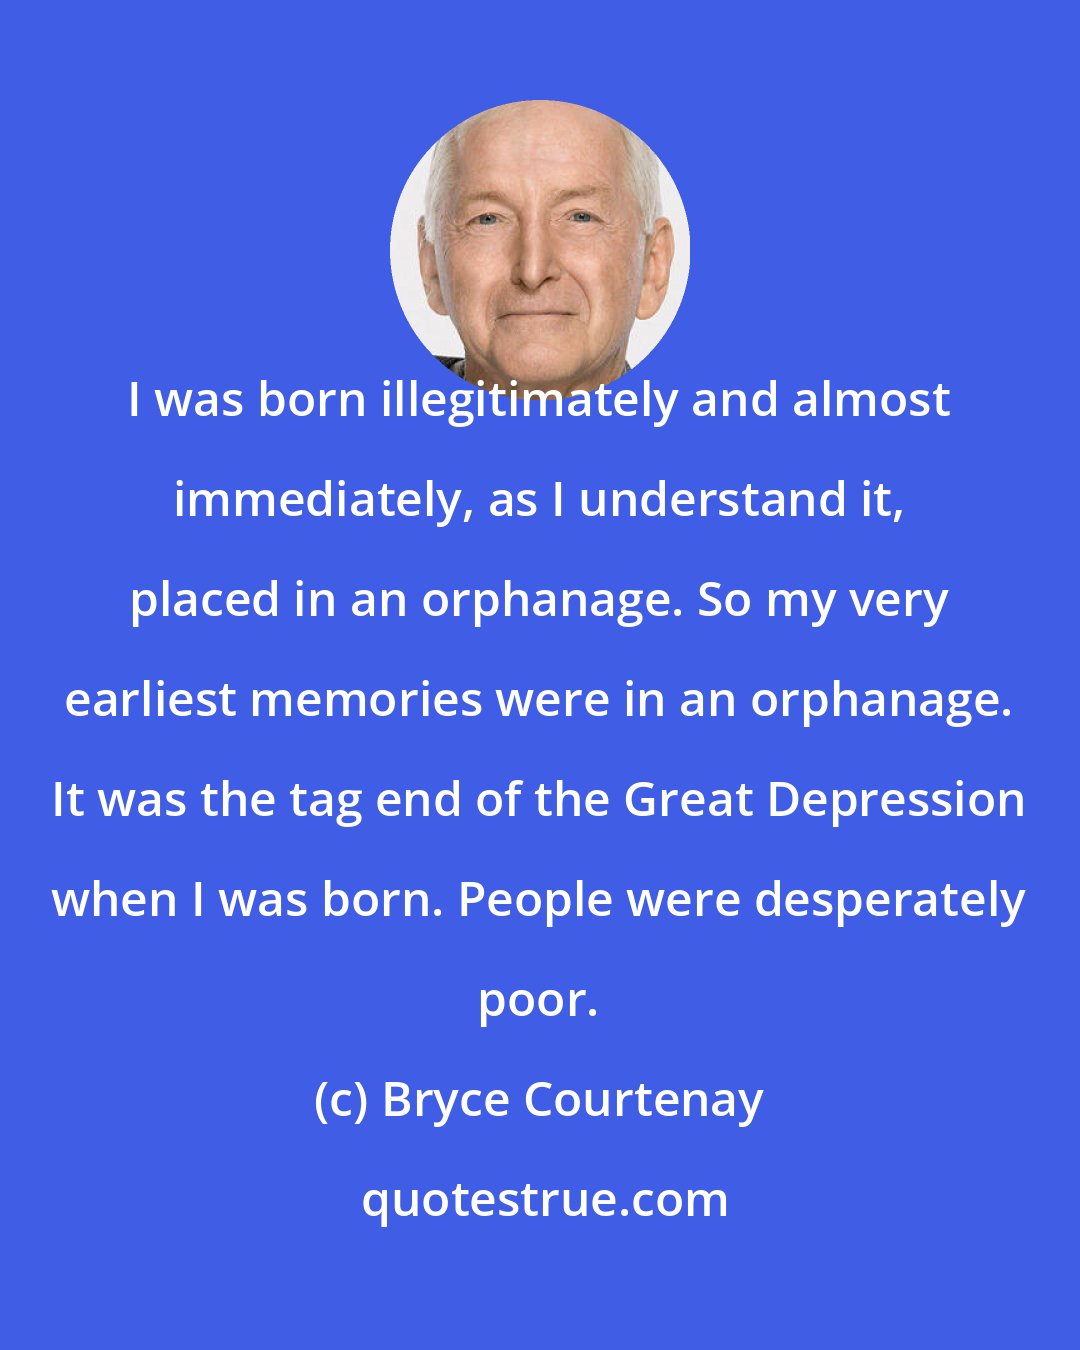 Bryce Courtenay: I was born illegitimately and almost immediately, as I understand it, placed in an orphanage. So my very earliest memories were in an orphanage. It was the tag end of the Great Depression when I was born. People were desperately poor.